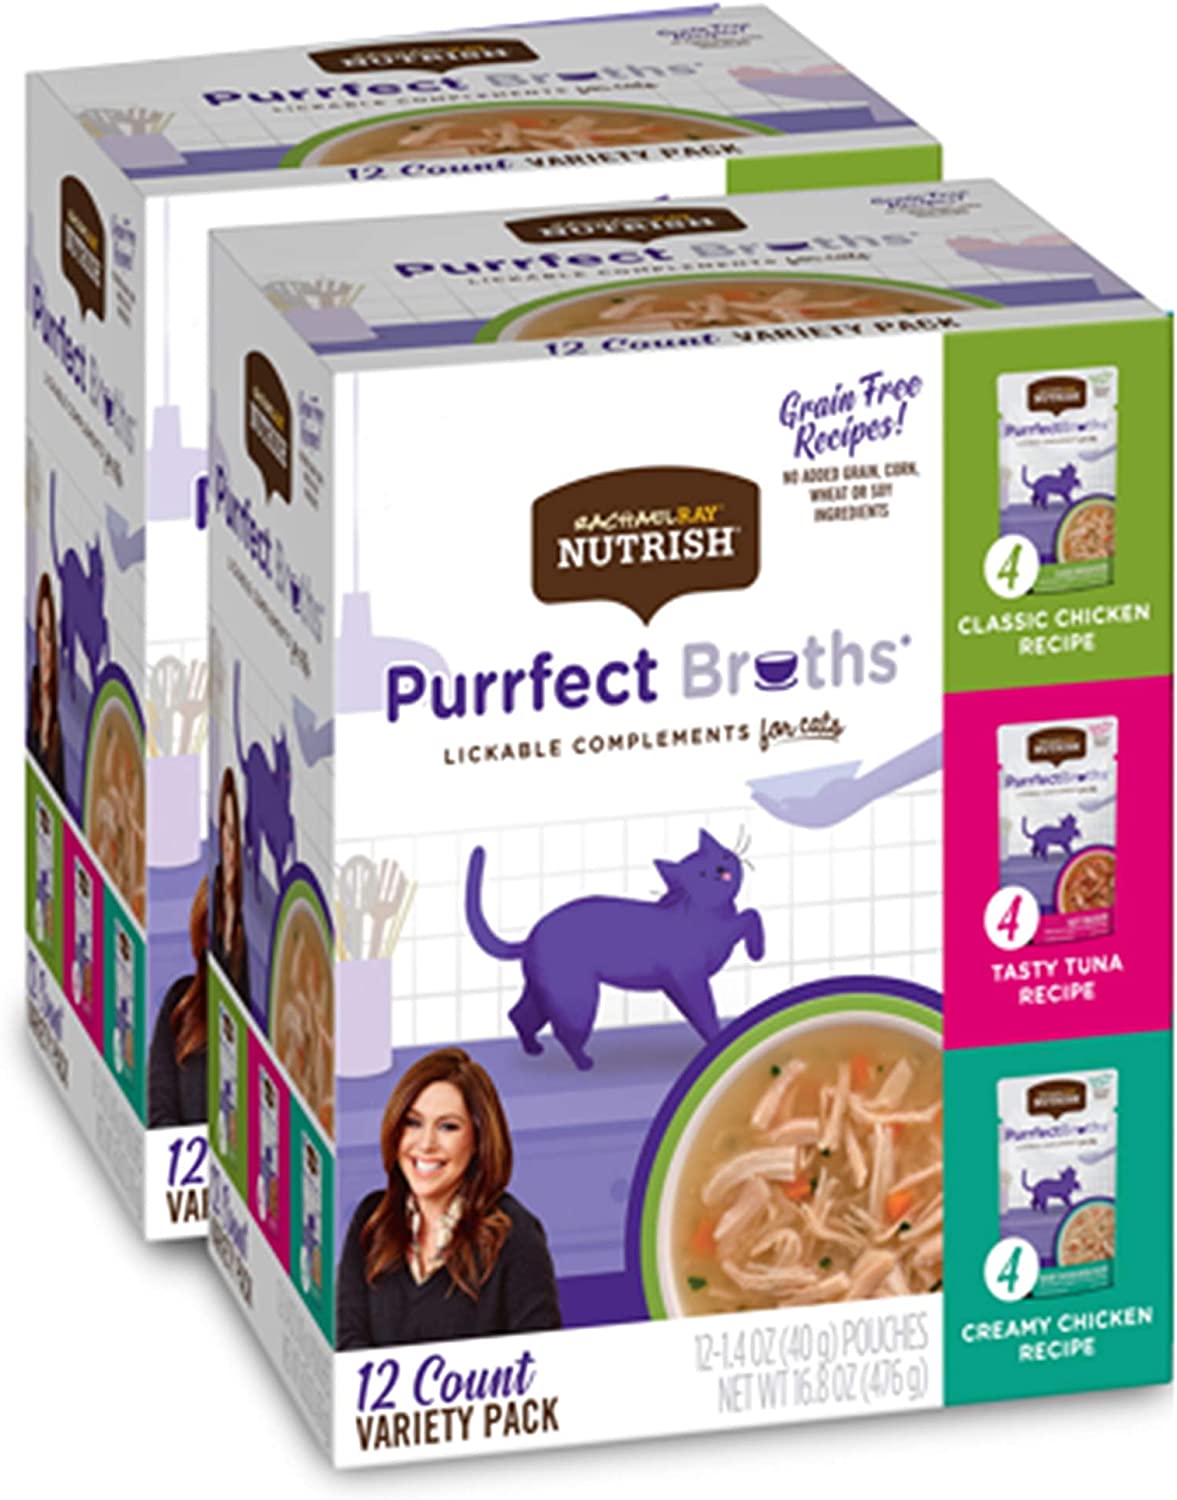 Rachael Ray Nutrish Purrfect Broths Natural Wet Cat Food, Variety Pack, 1.4 Ounce Pouch  (Pack of 24), Grain Free